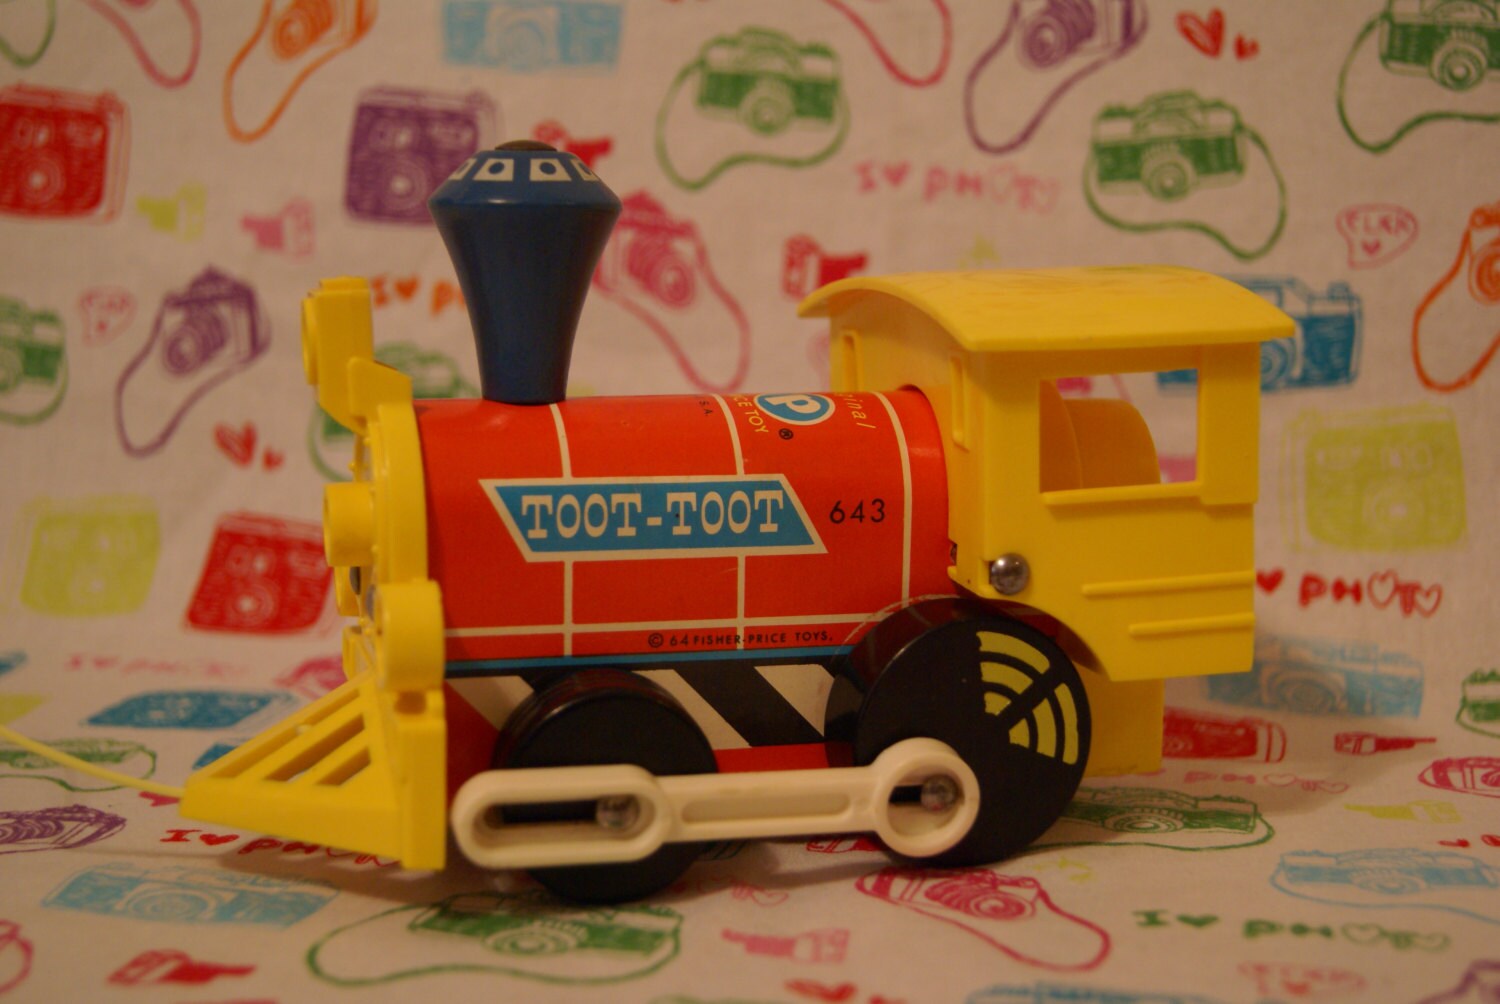 Vintage Fisher Price Toy Toot-Toot Train 643 by mandtsimplyvintage